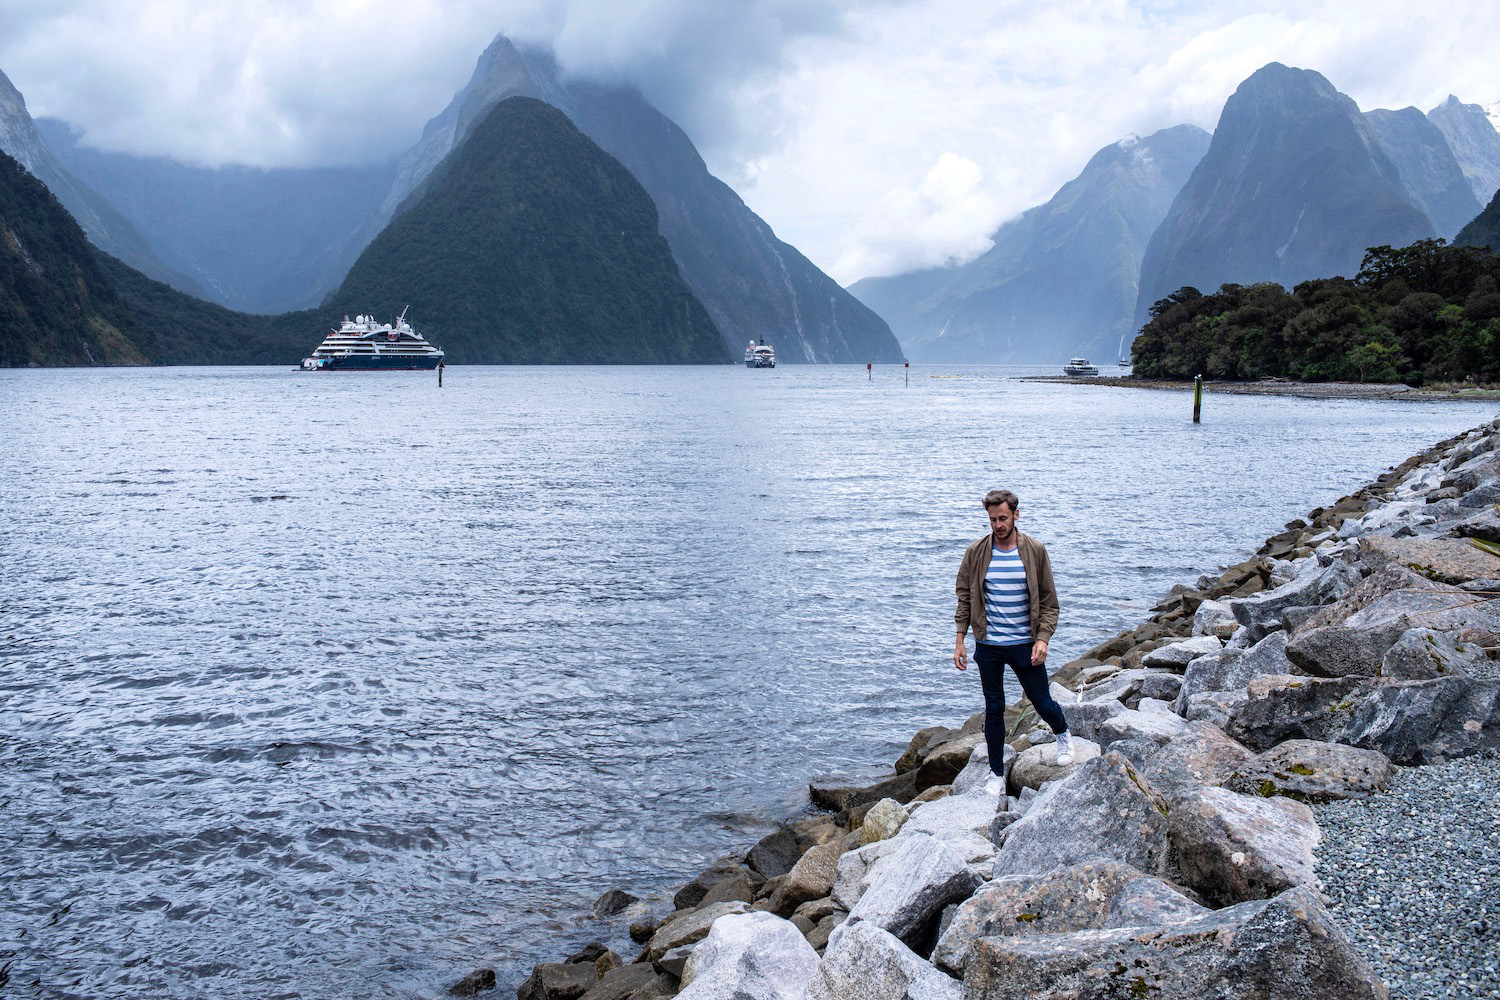 Does the Milford Sound Live Up to the Hype?